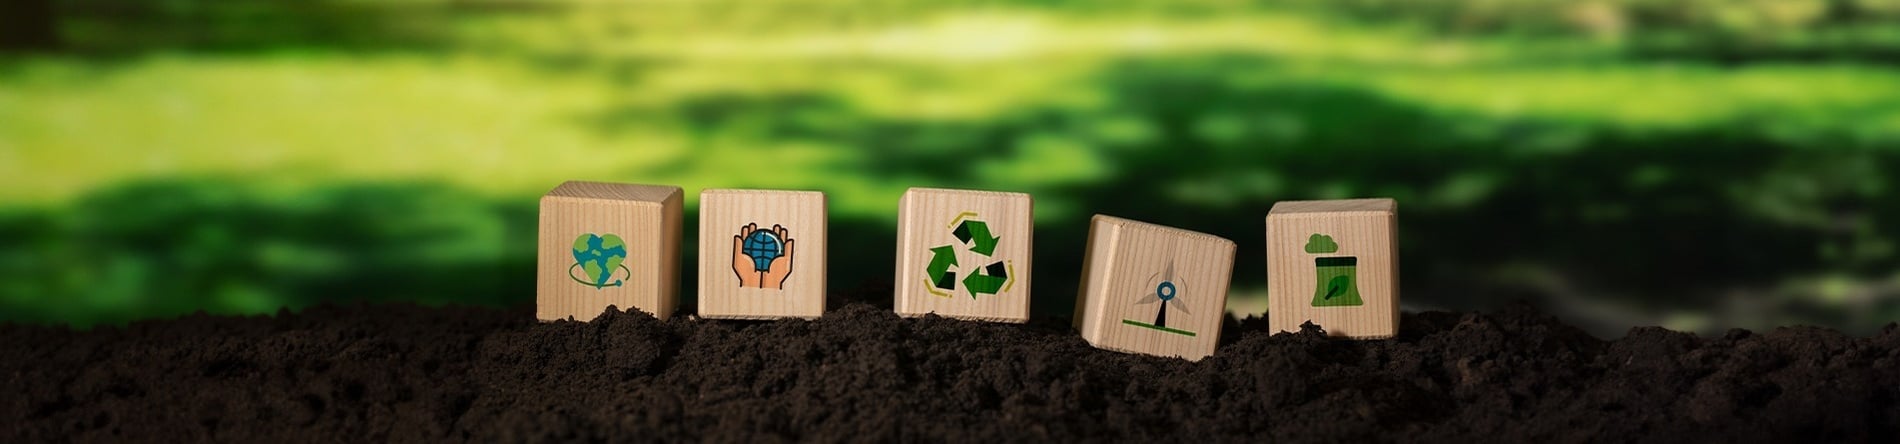 a row of wooden blocks with environmental icons on them